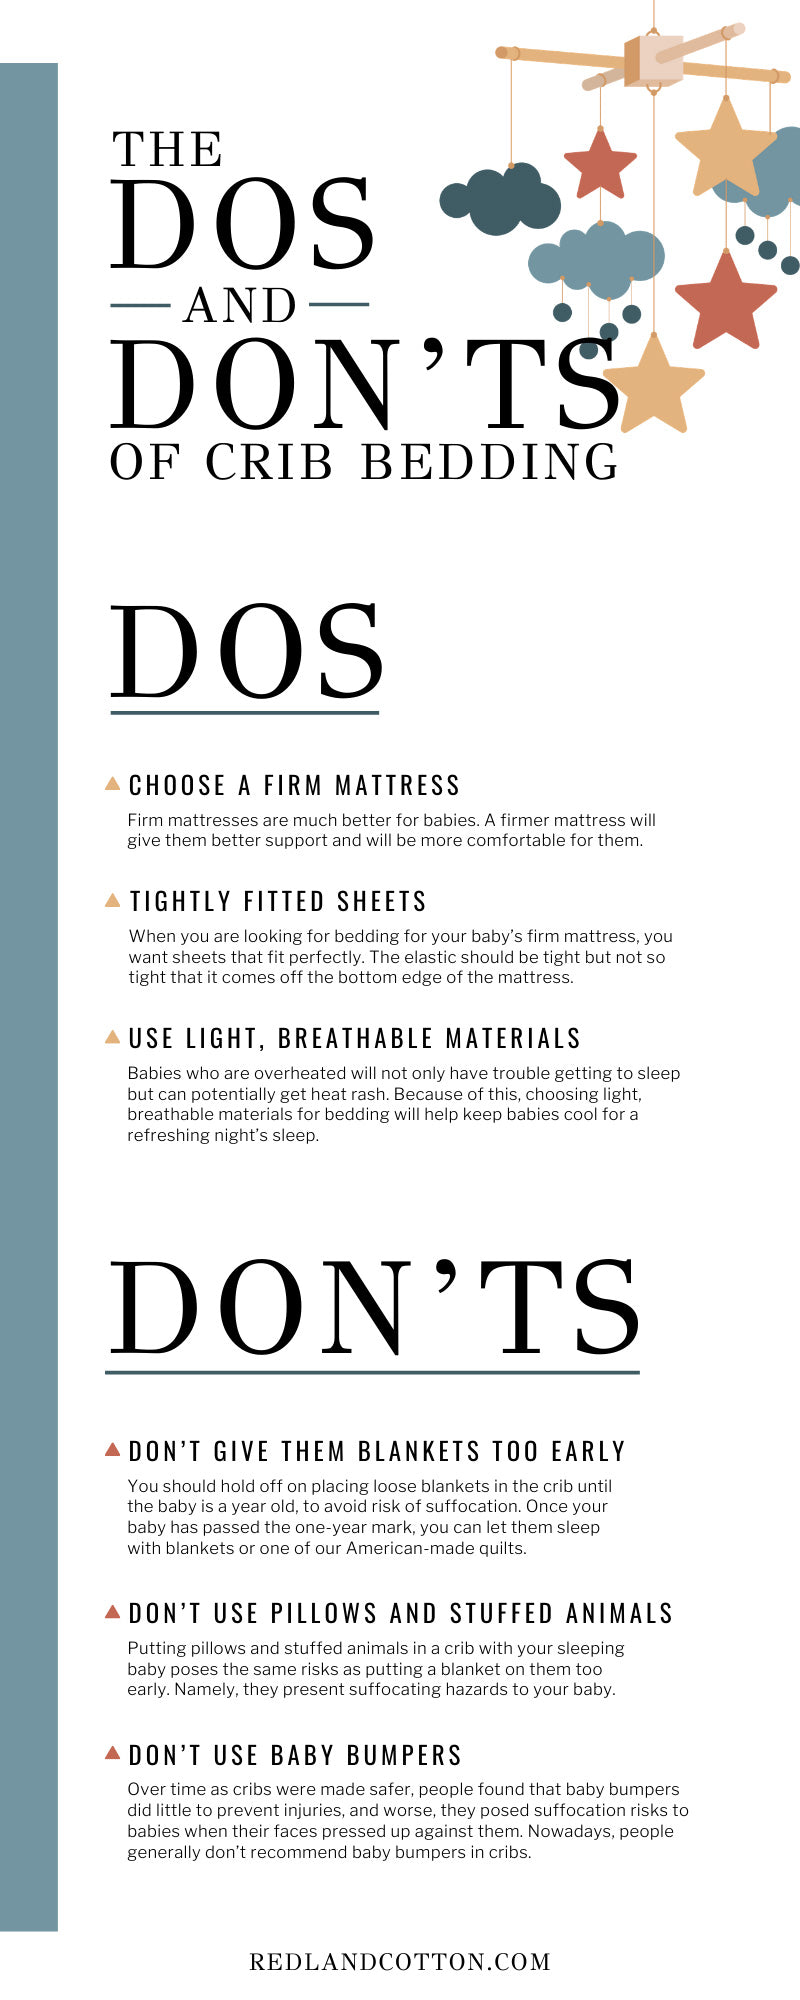 The Dos and Don’ts of Crib Bedding infographic